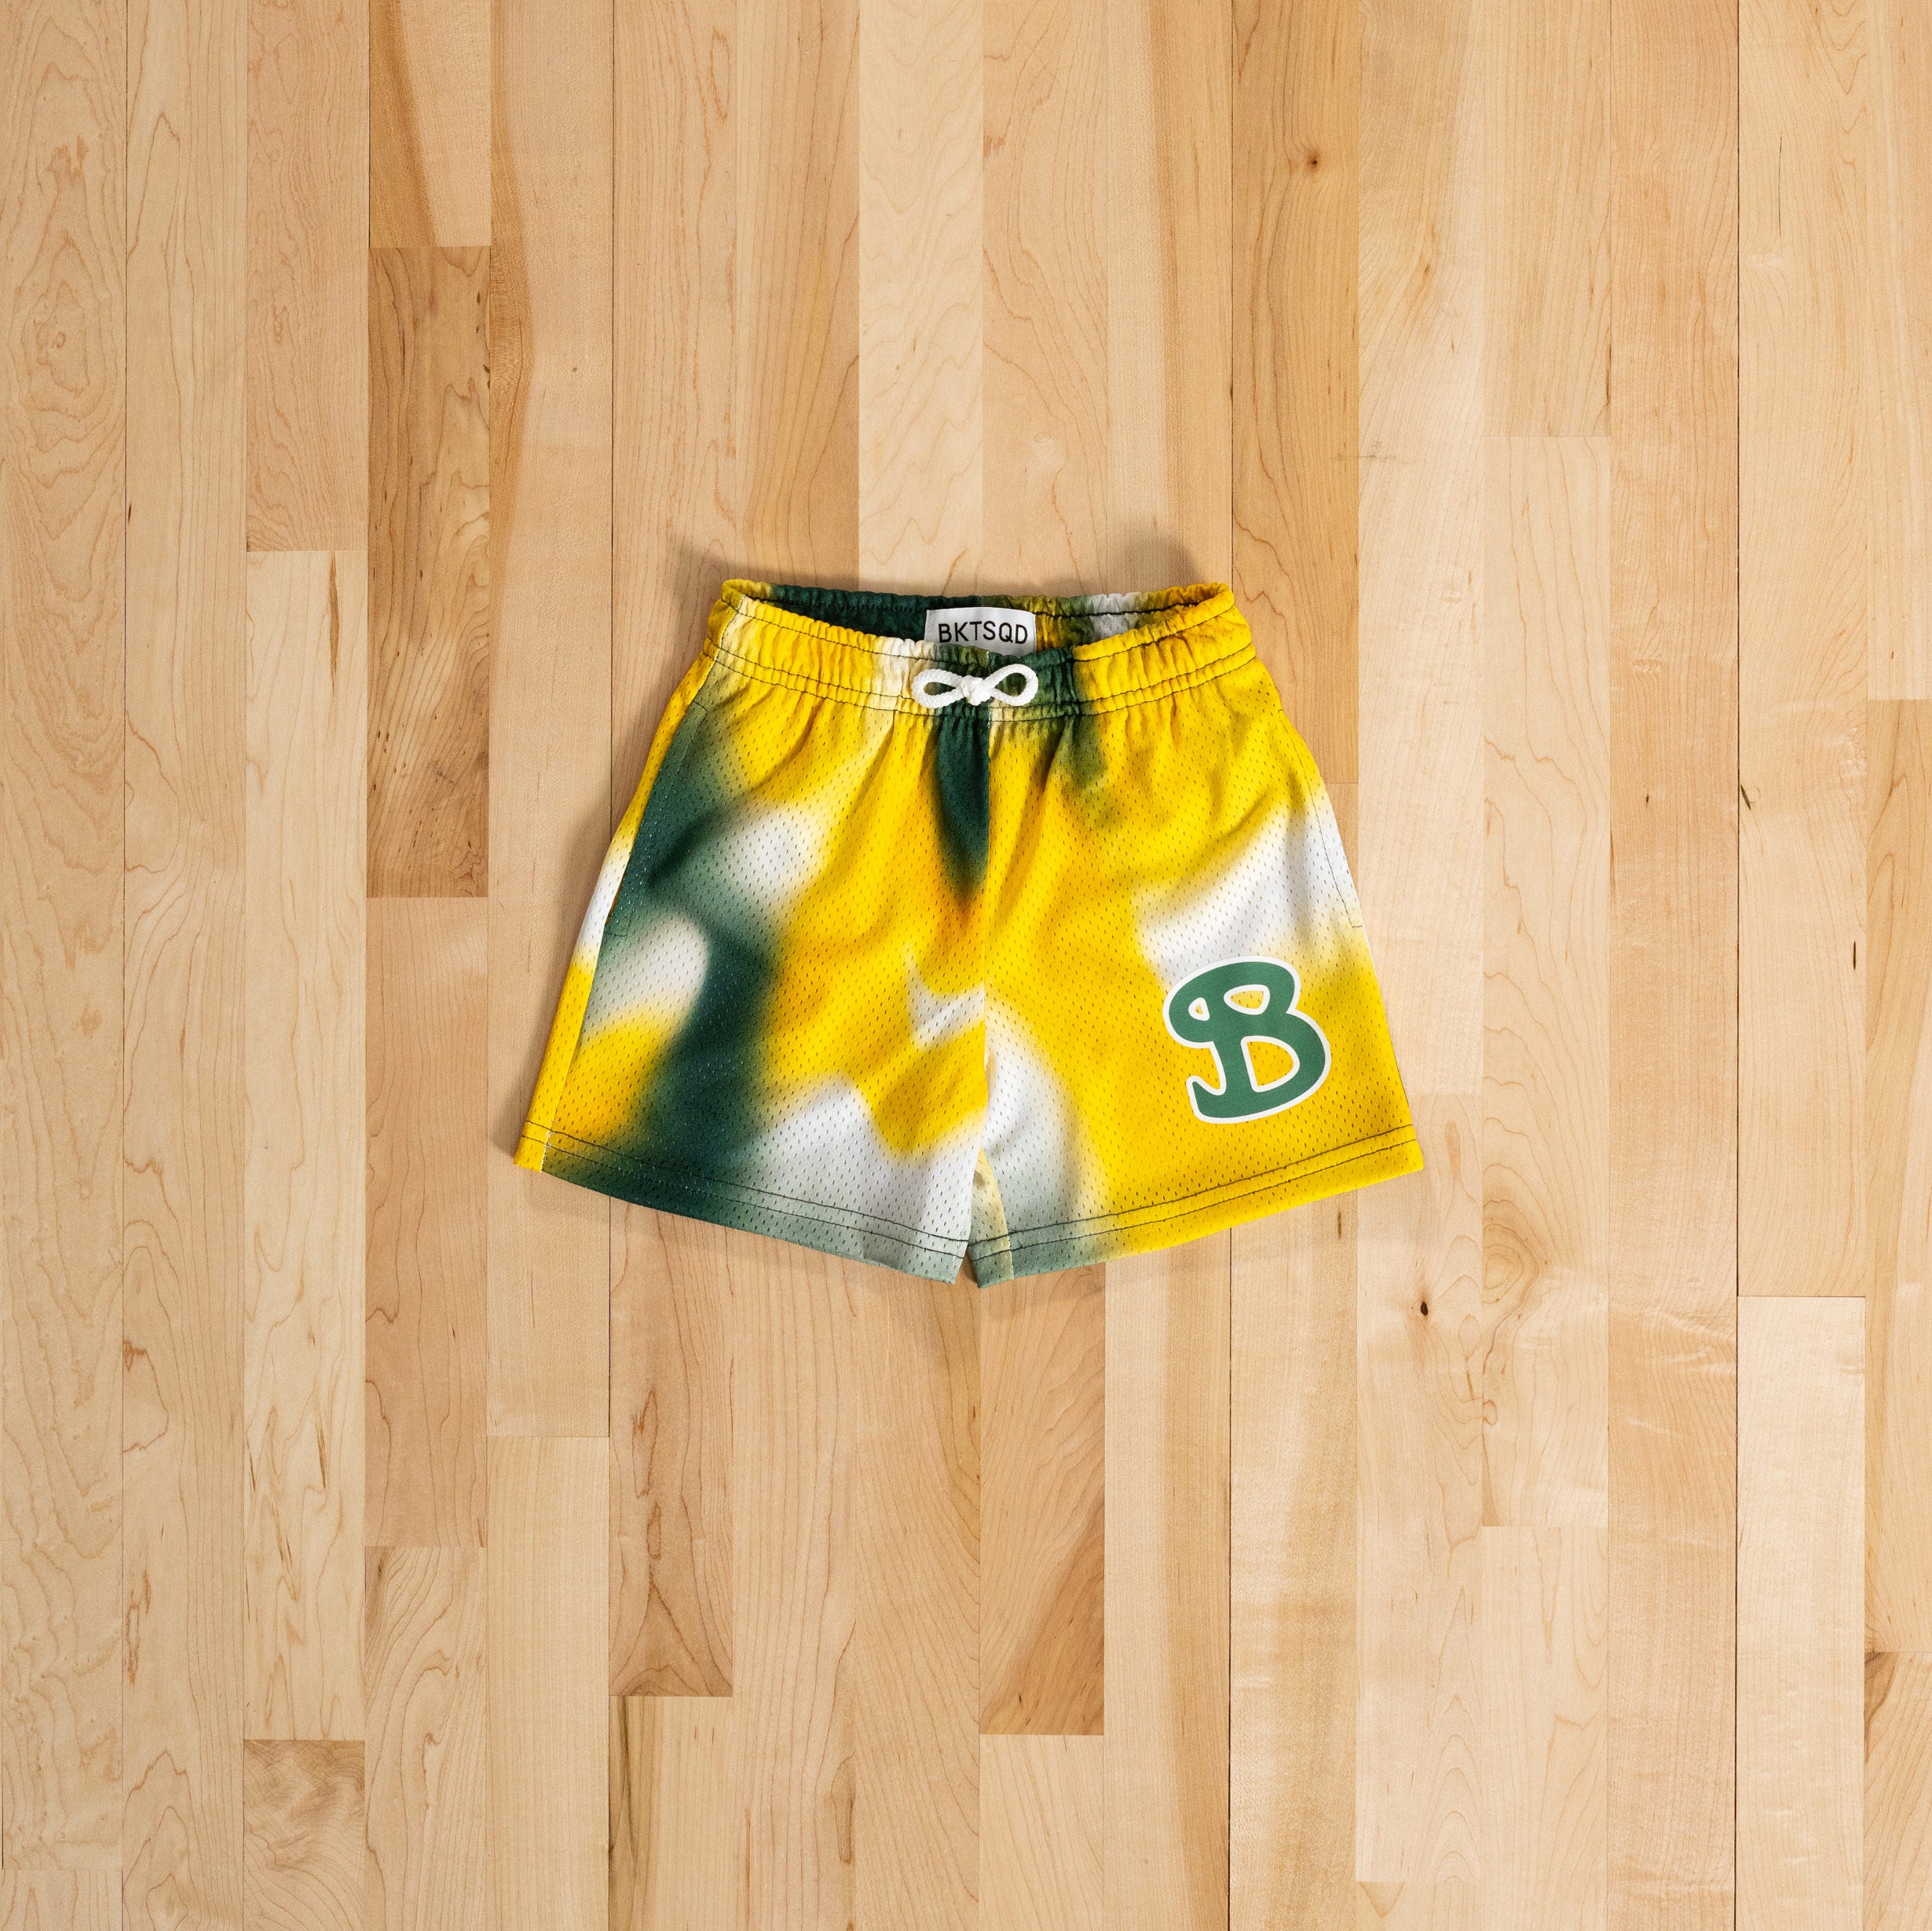 MARCH SLAM YOUTH SHORTS - GREEN, YELLOW, WHITE